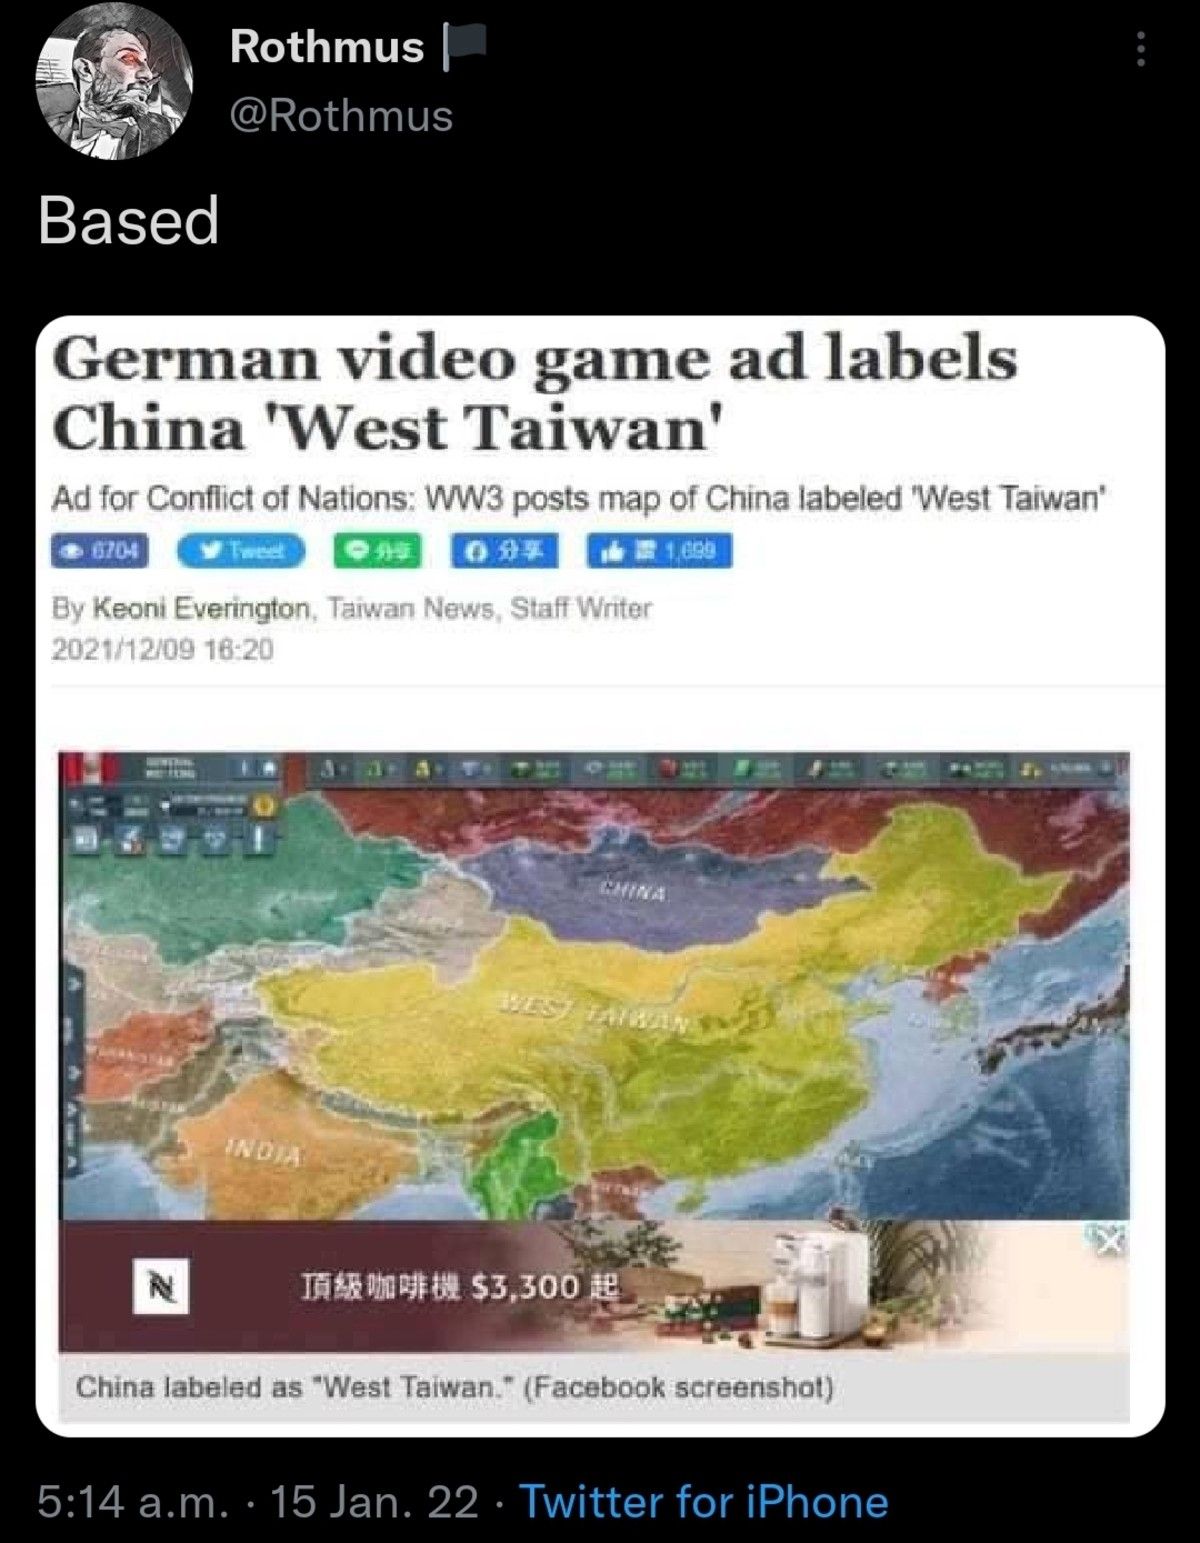 why not 'lesser taiwan'?